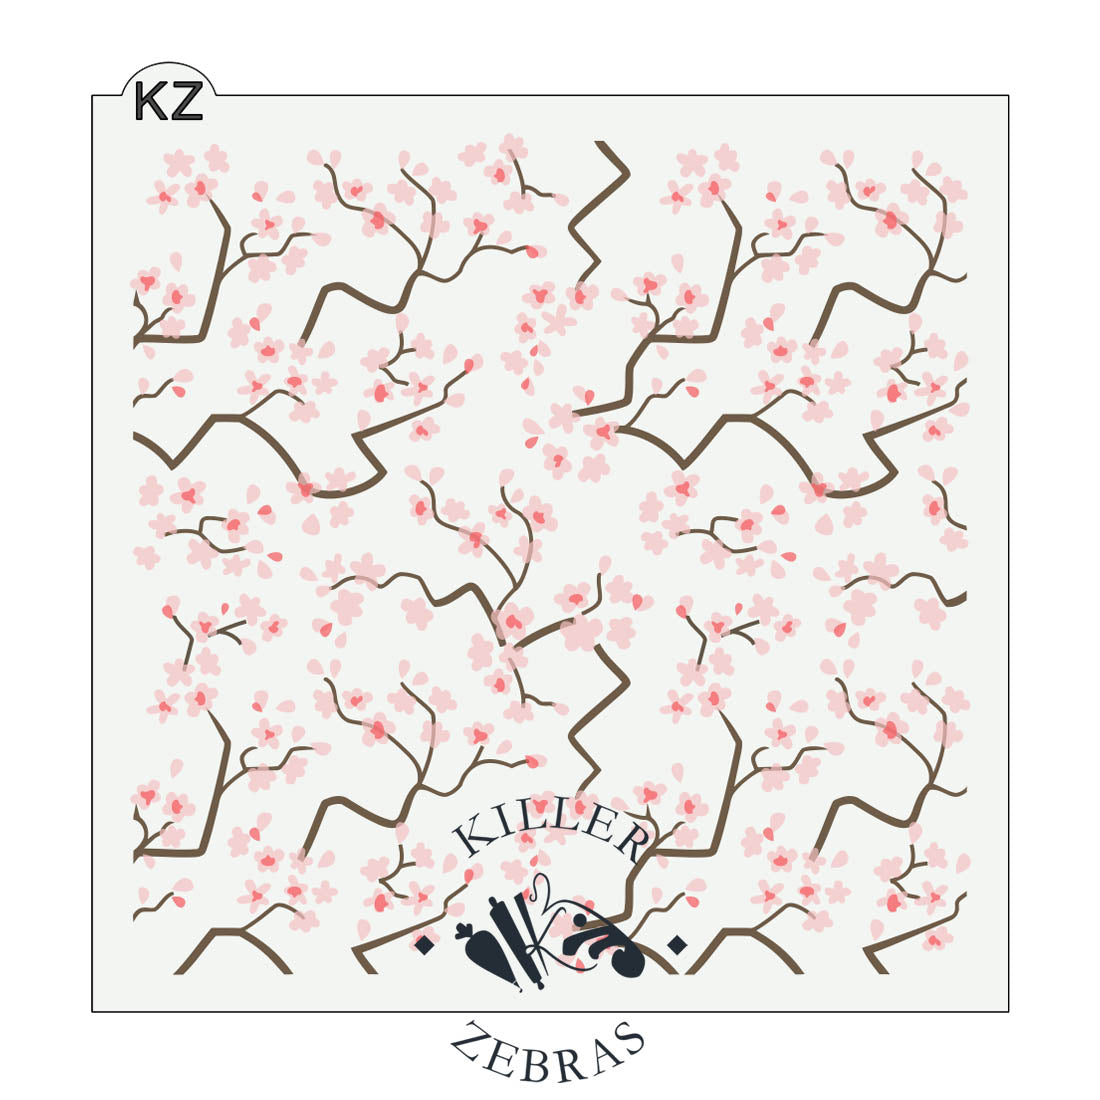 Large, square stencil with multiple small cherry blossom branches which are brown with pink blossoms.